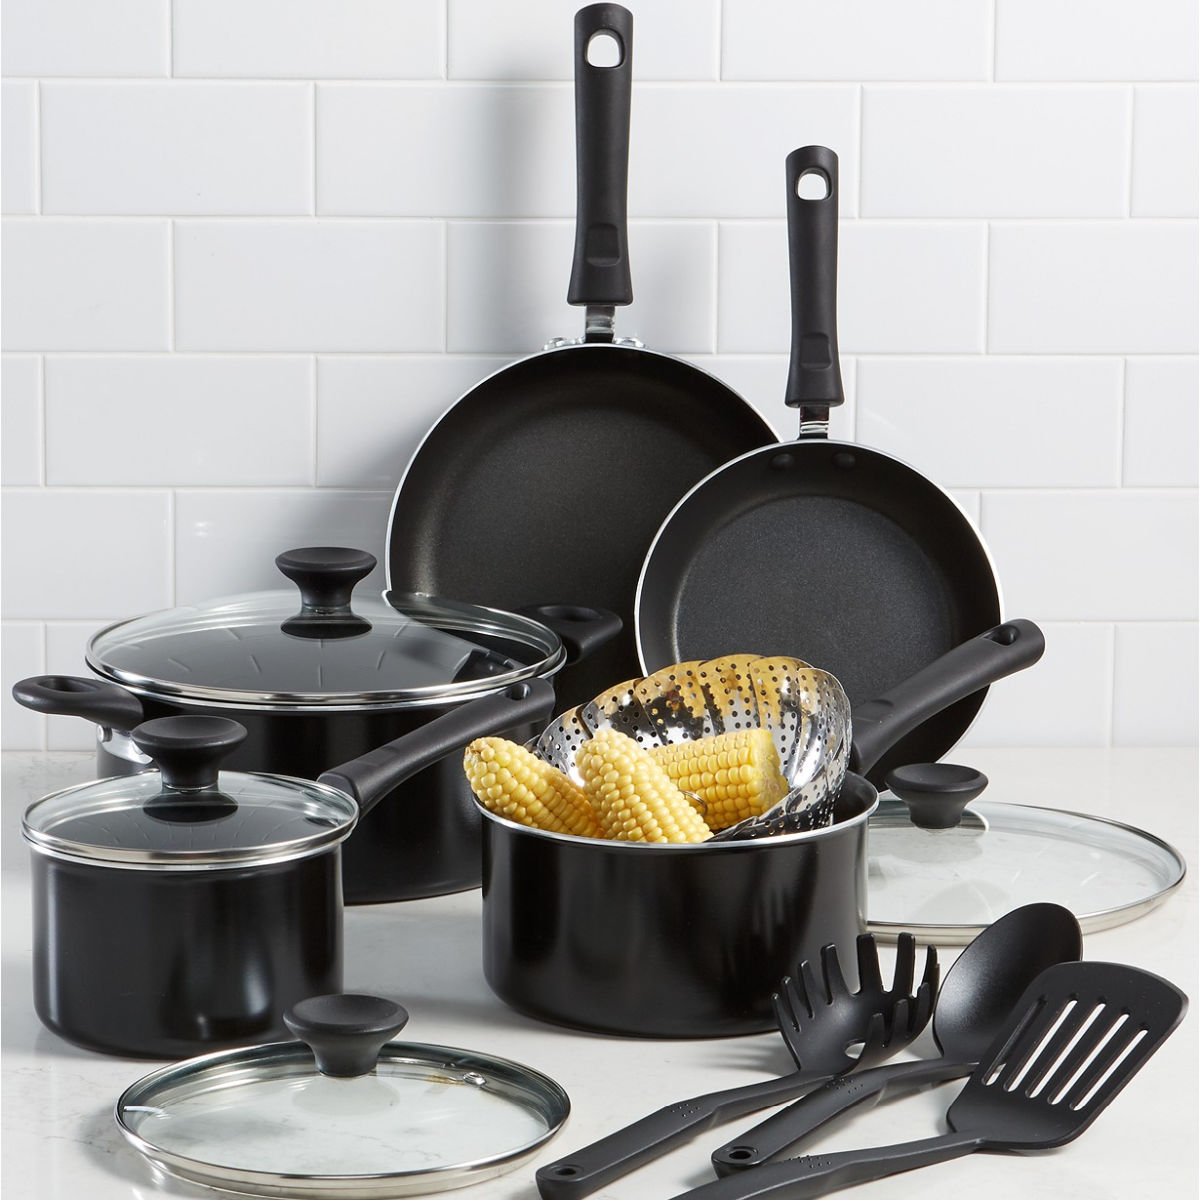 Tools of the Trade Nonstick 13-Piece Cookware Set Black